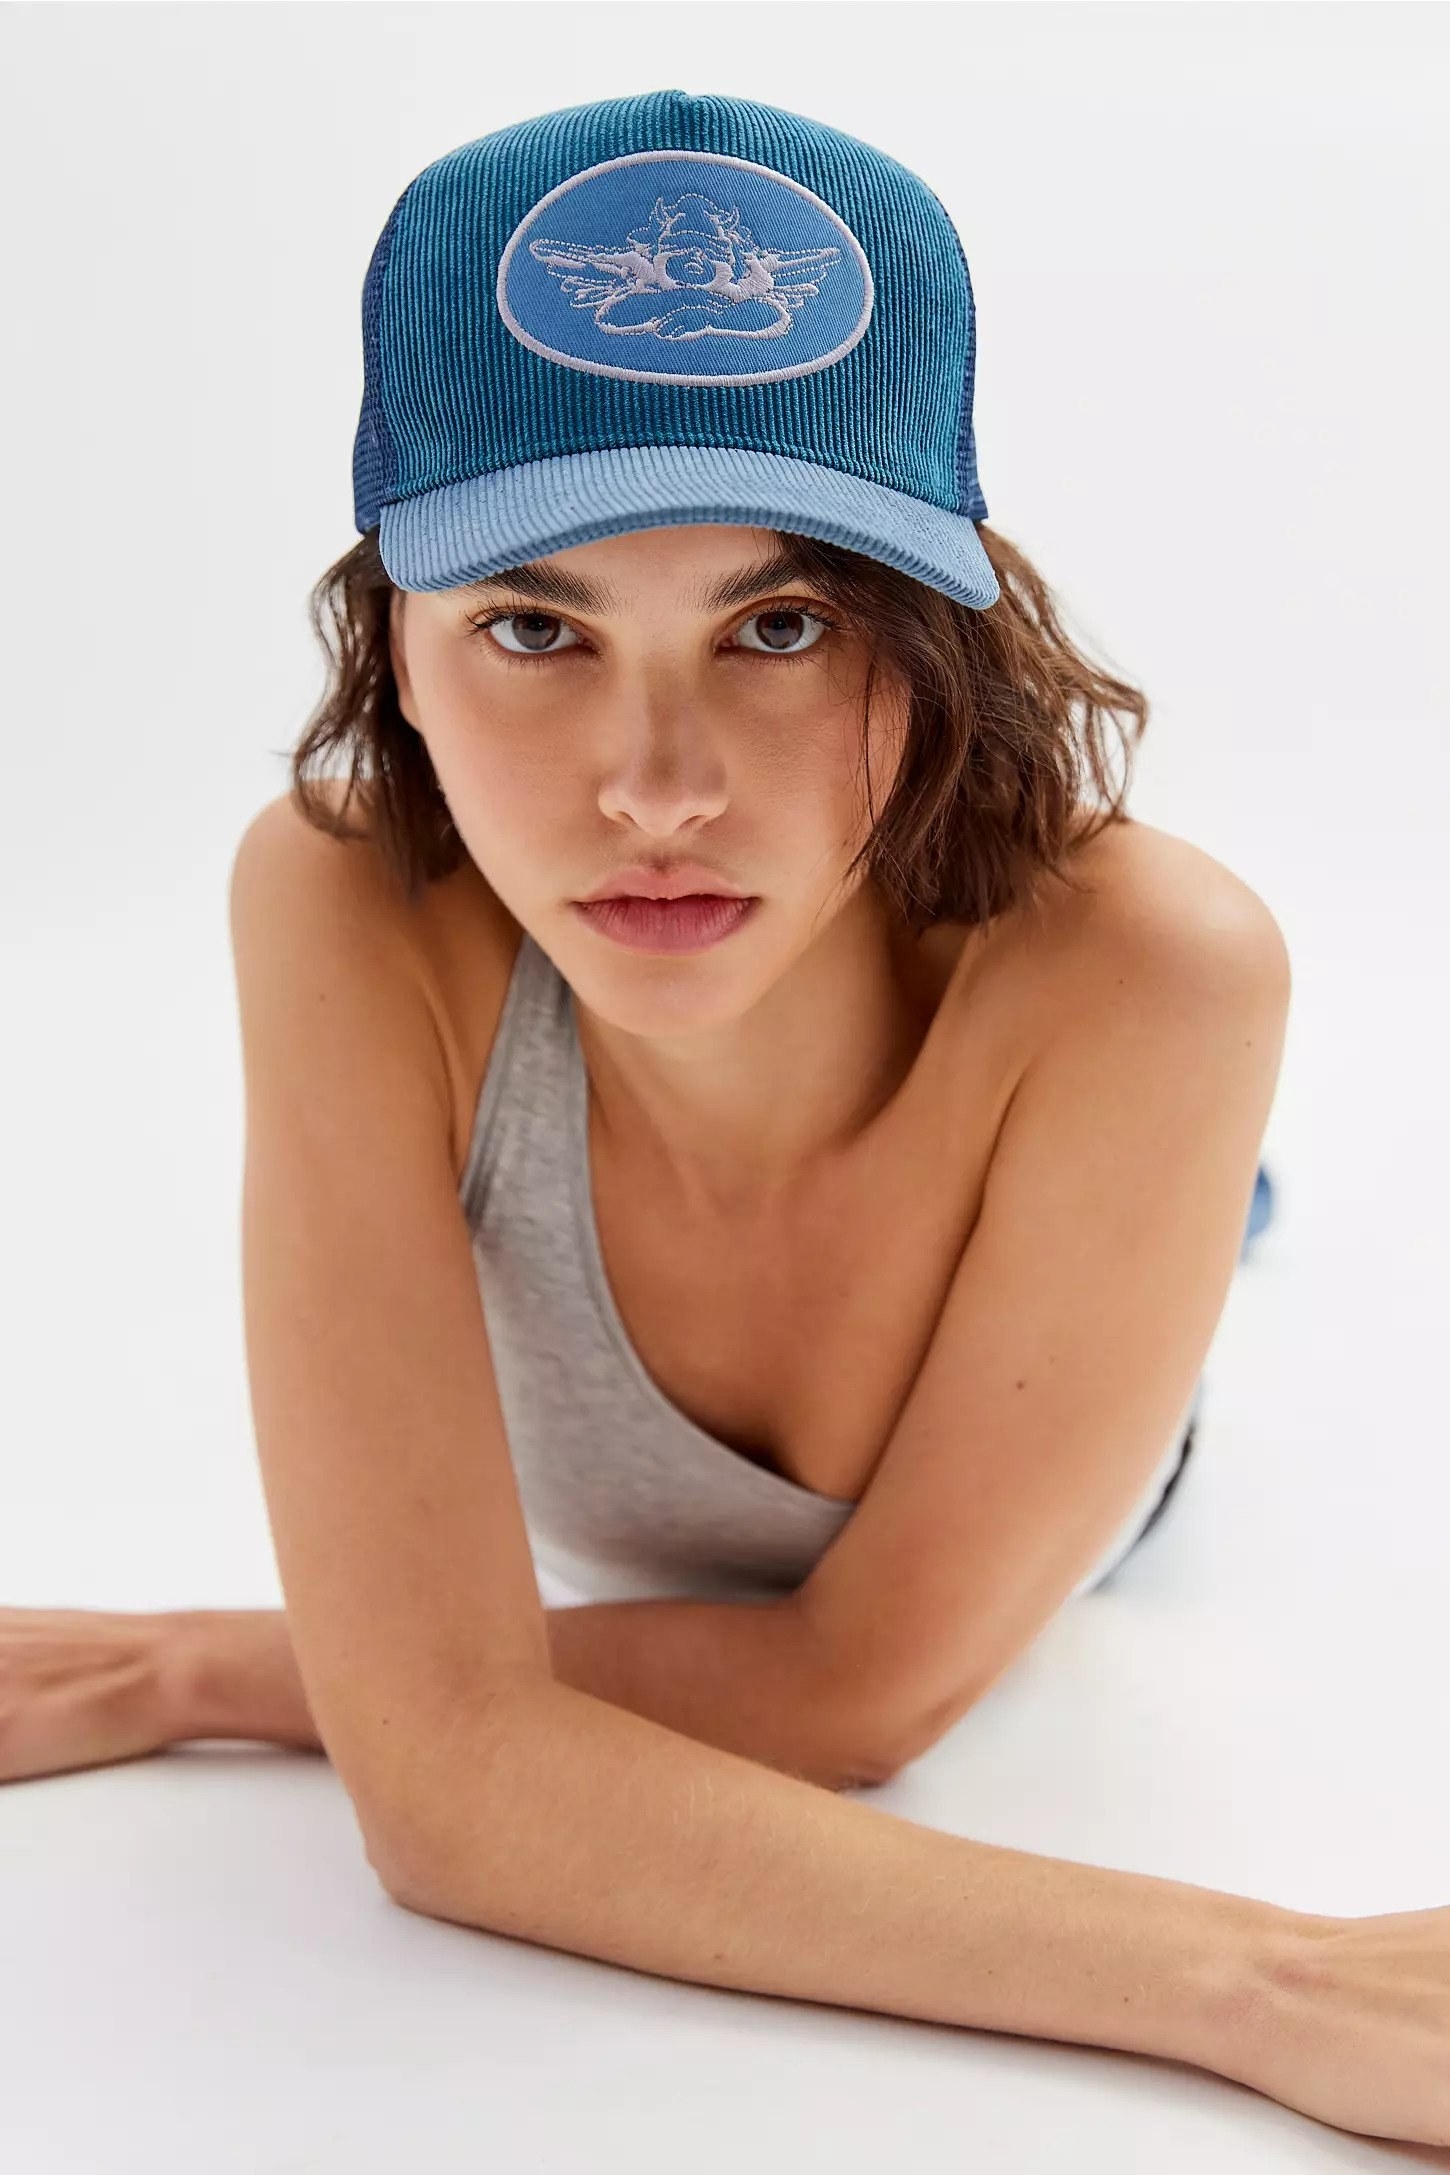 Model wearing blue corduroy trucker hat with angel embroidered patch on front